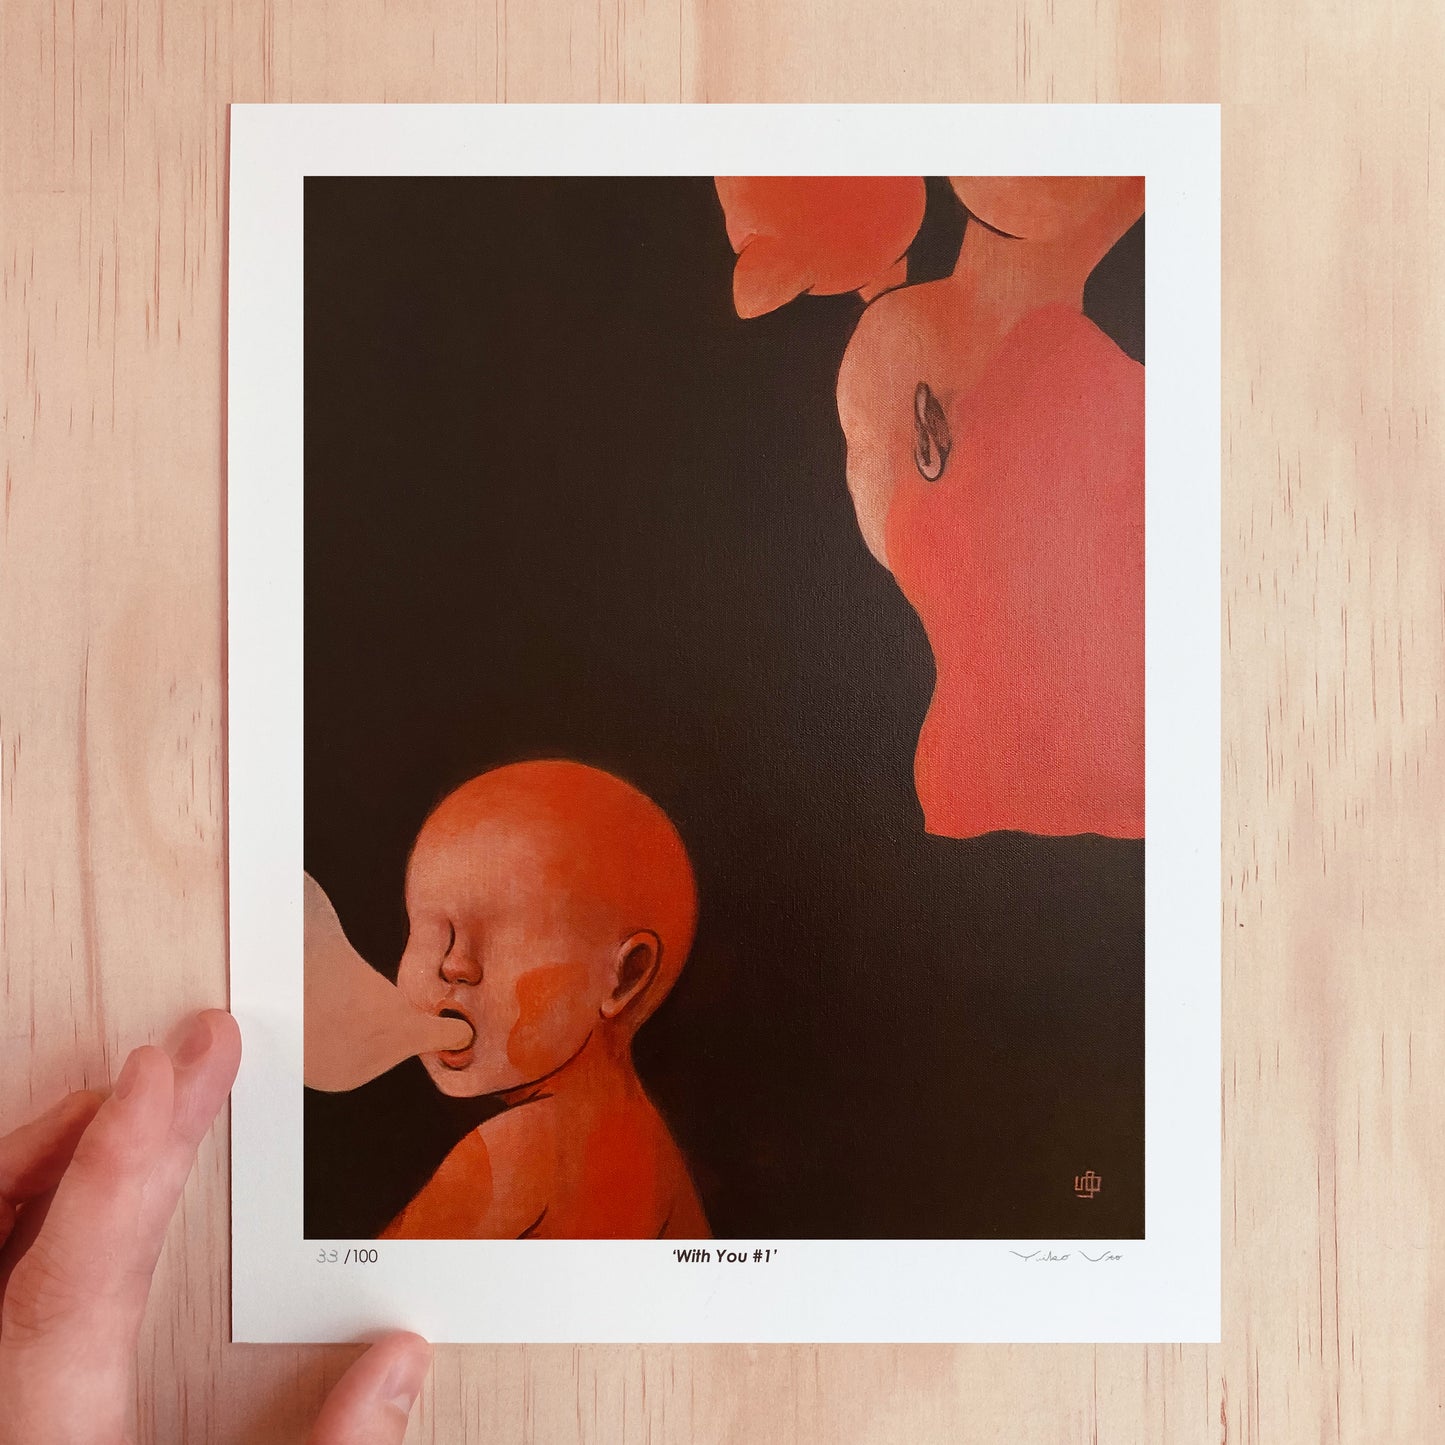 Art Print ‘With You #1’ (Limited print of 100)